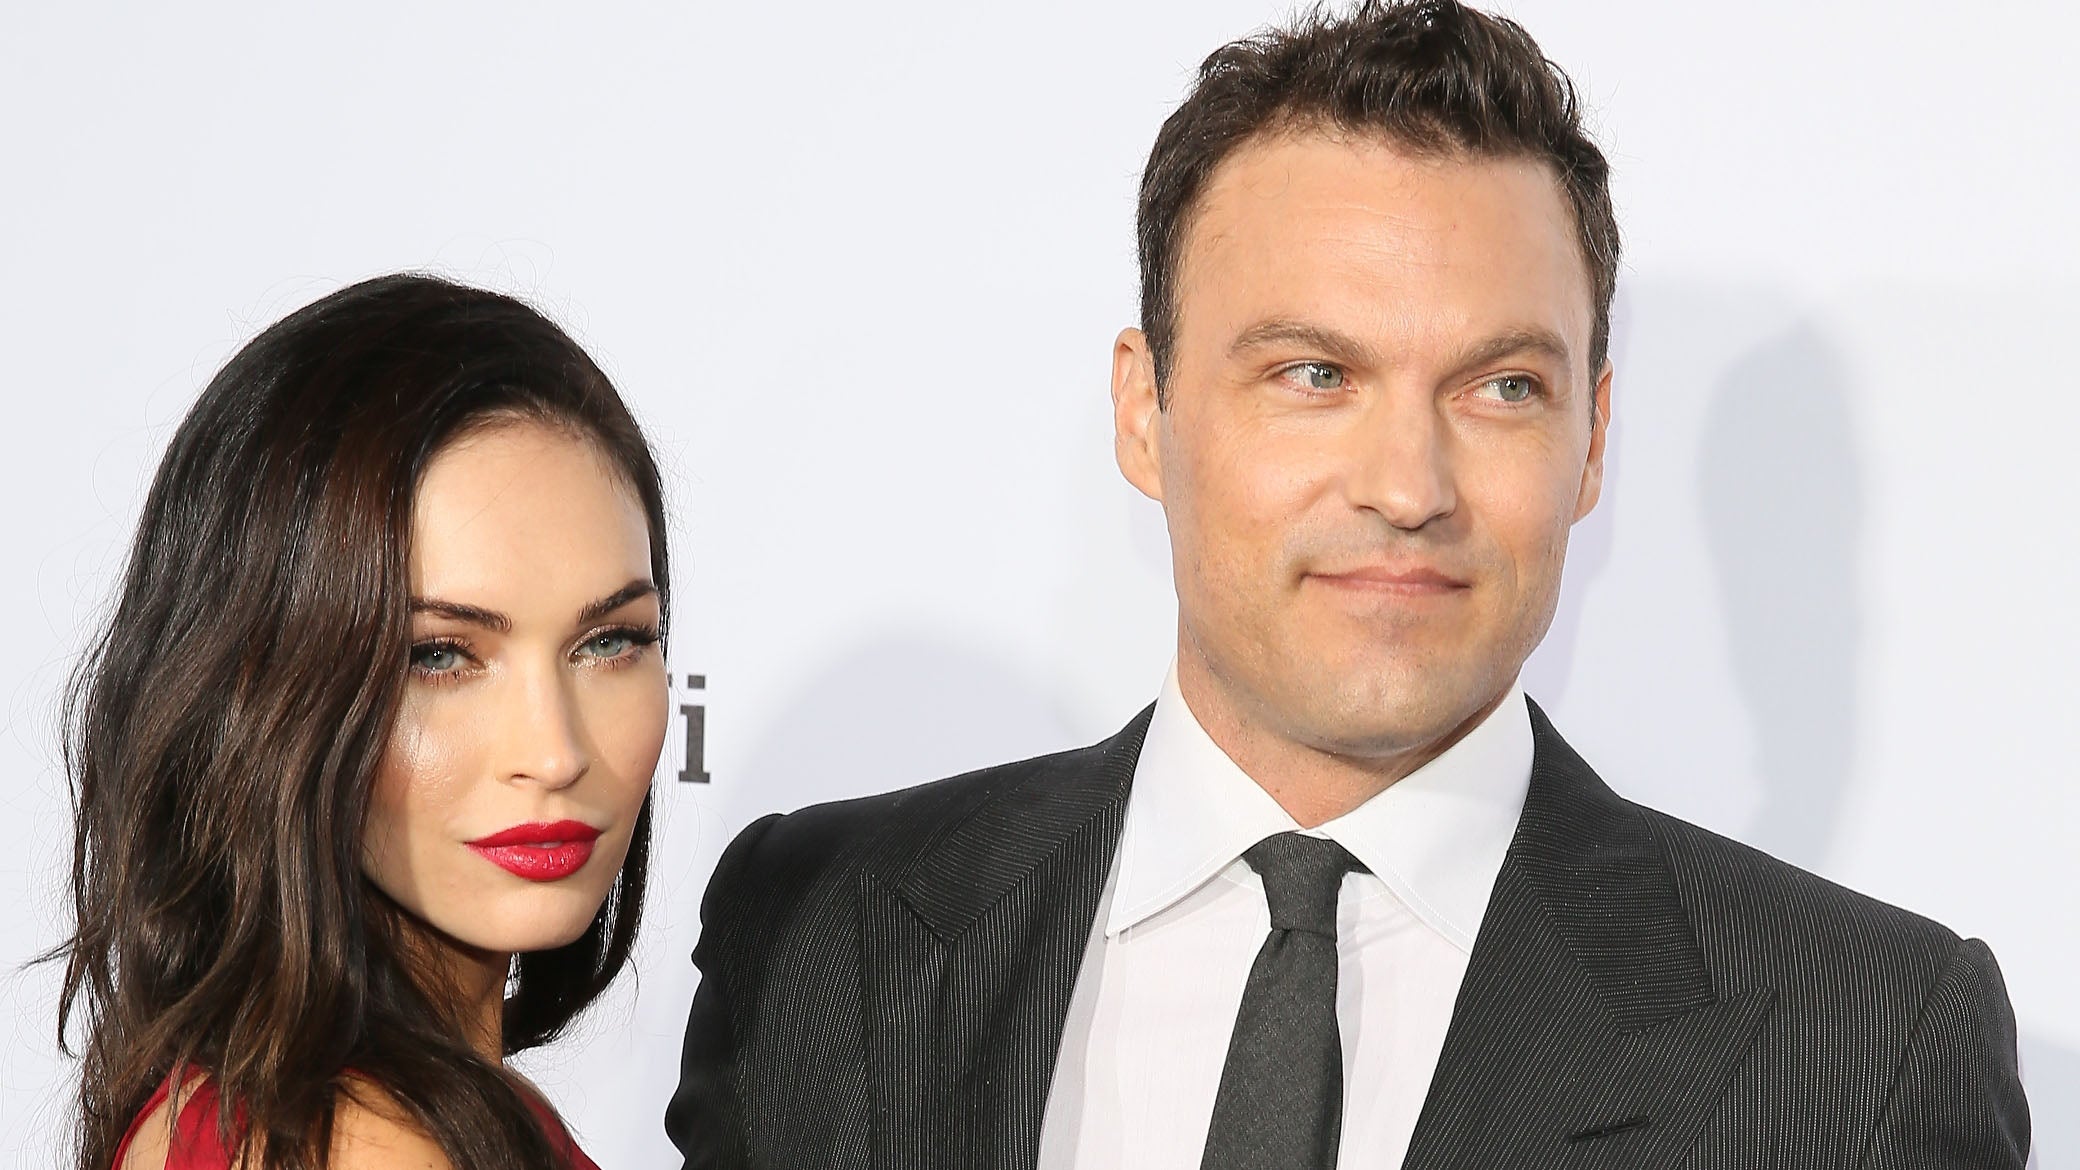 Megan Fox Got Her Bikini Line Tattoo For Ex Brian Austin Green Covered Up  And The New Ink Is Gorgeous  Cinemablend